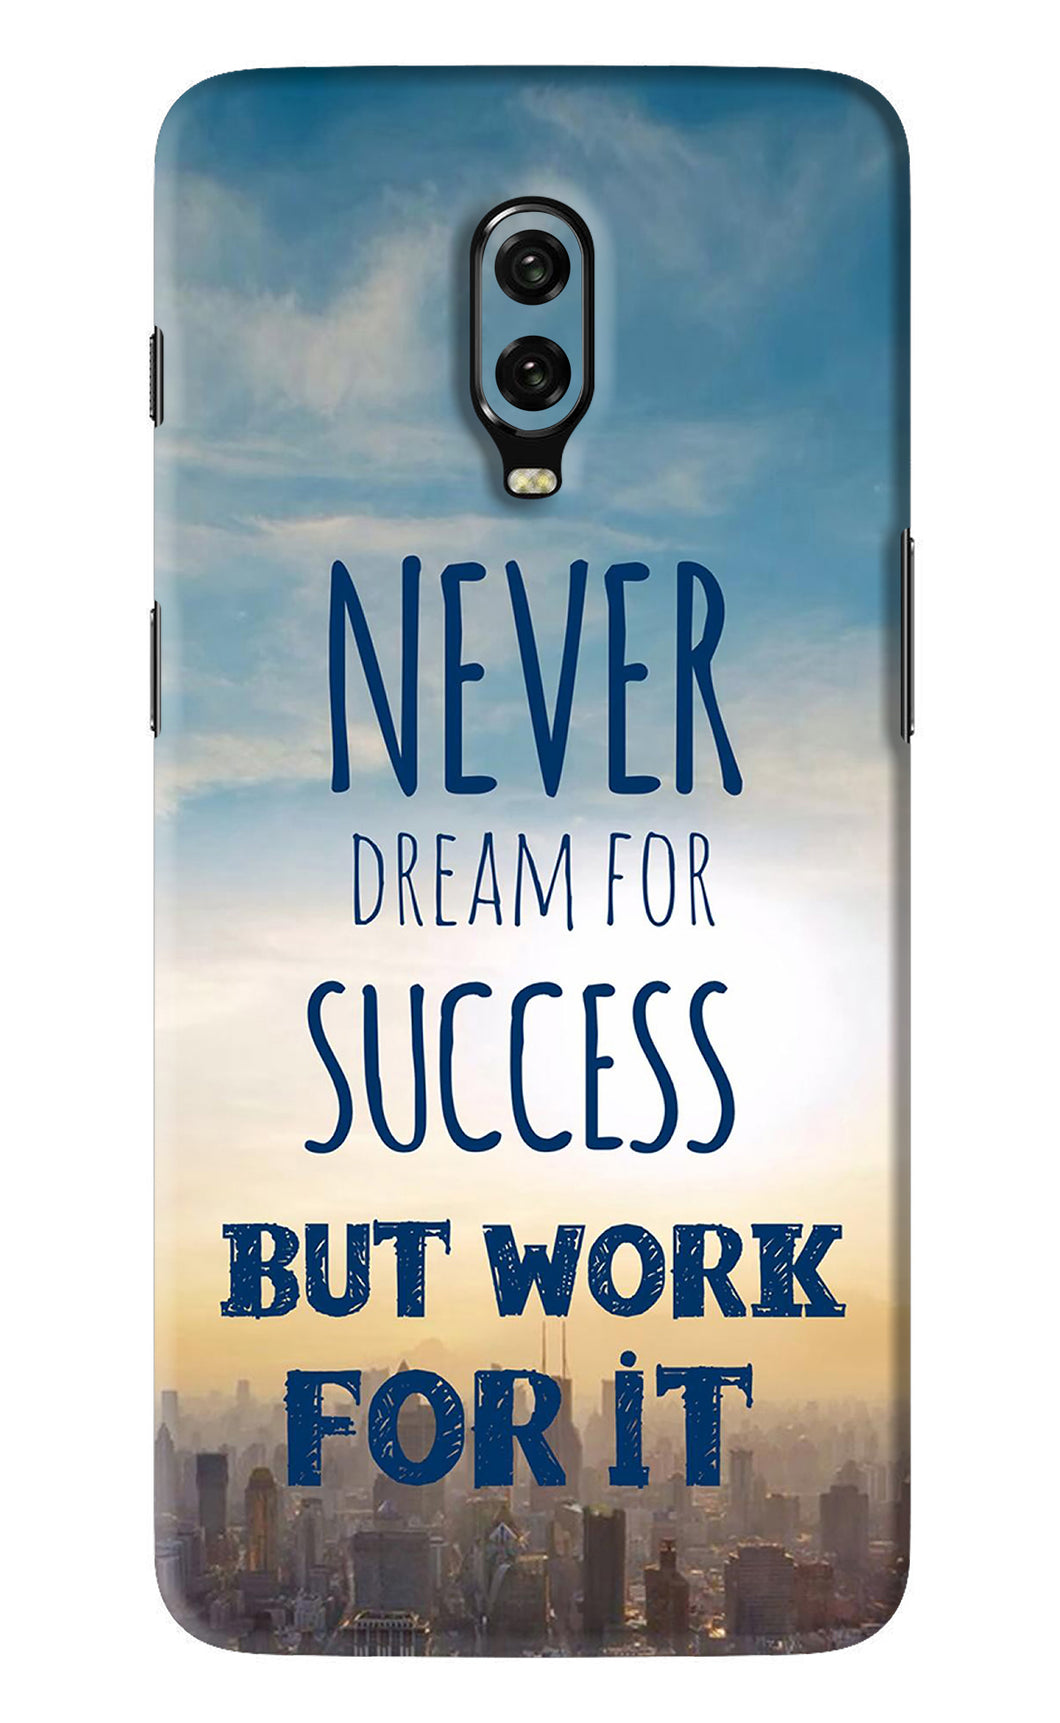 Never Dream For Success But Work For It OnePlus 6T Back Skin Wrap